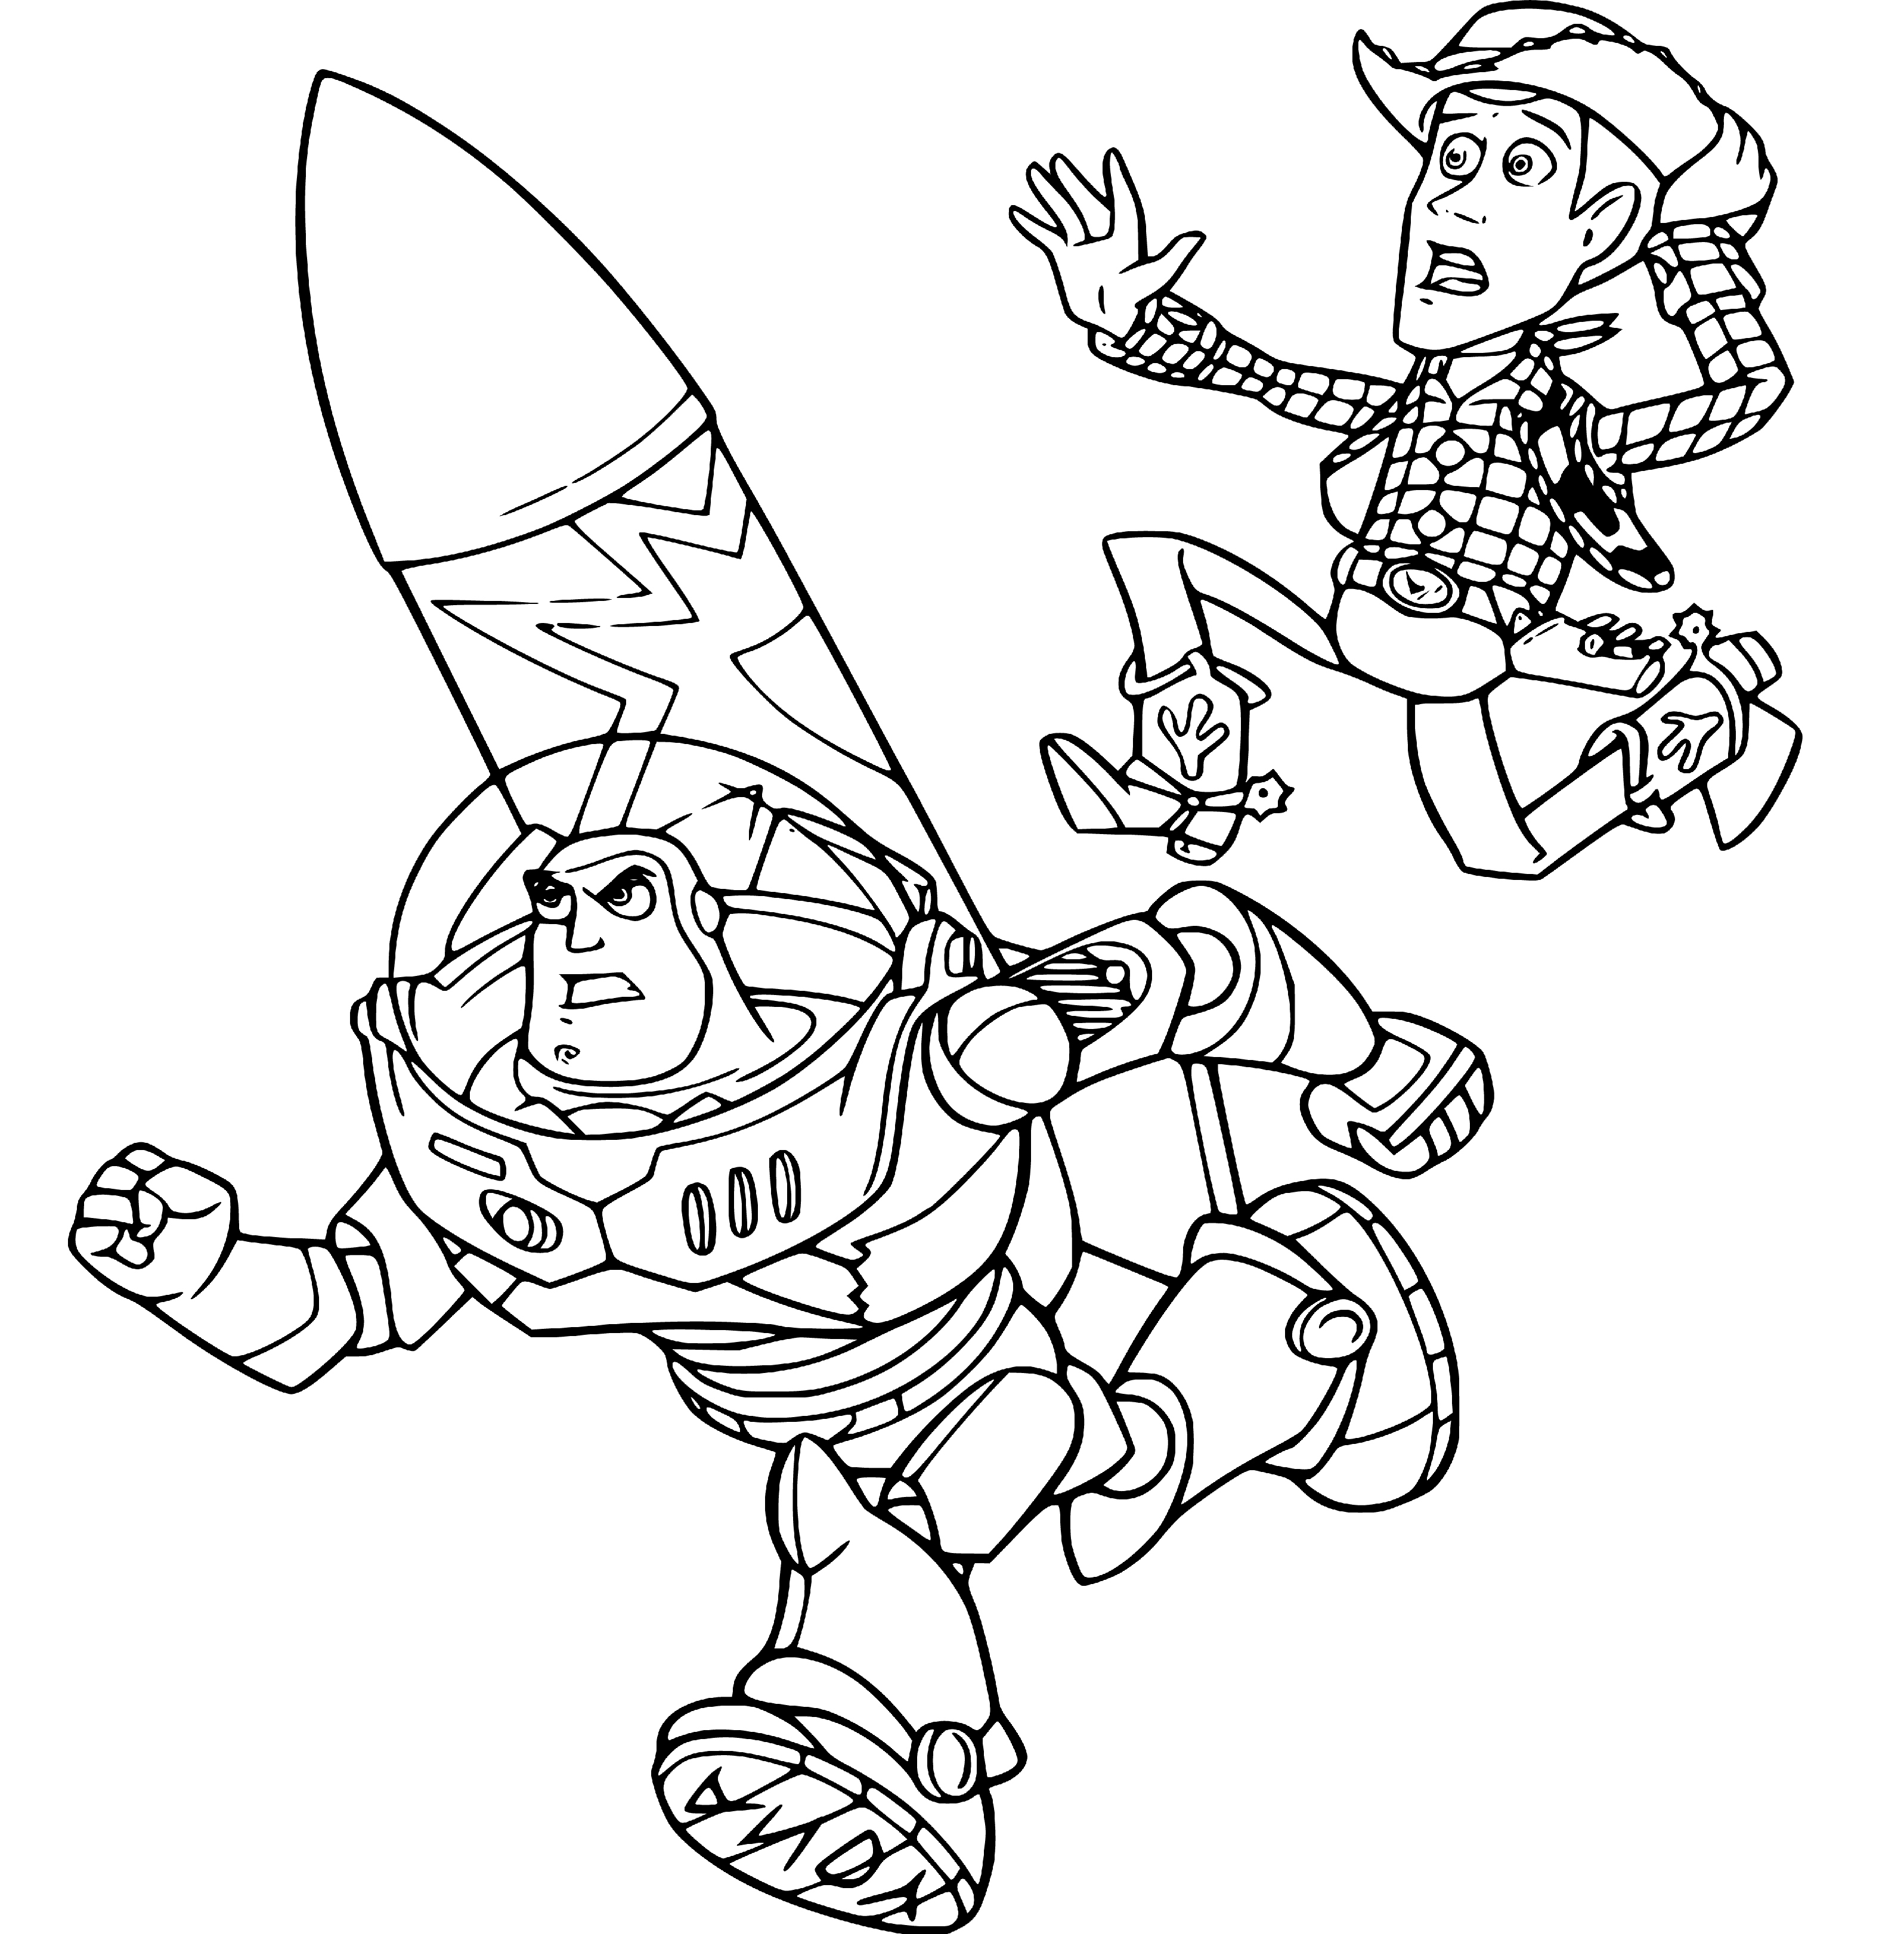 Toy Story: Woody and Buzz Coloring Page for Kids Printable - SheetalColor.com